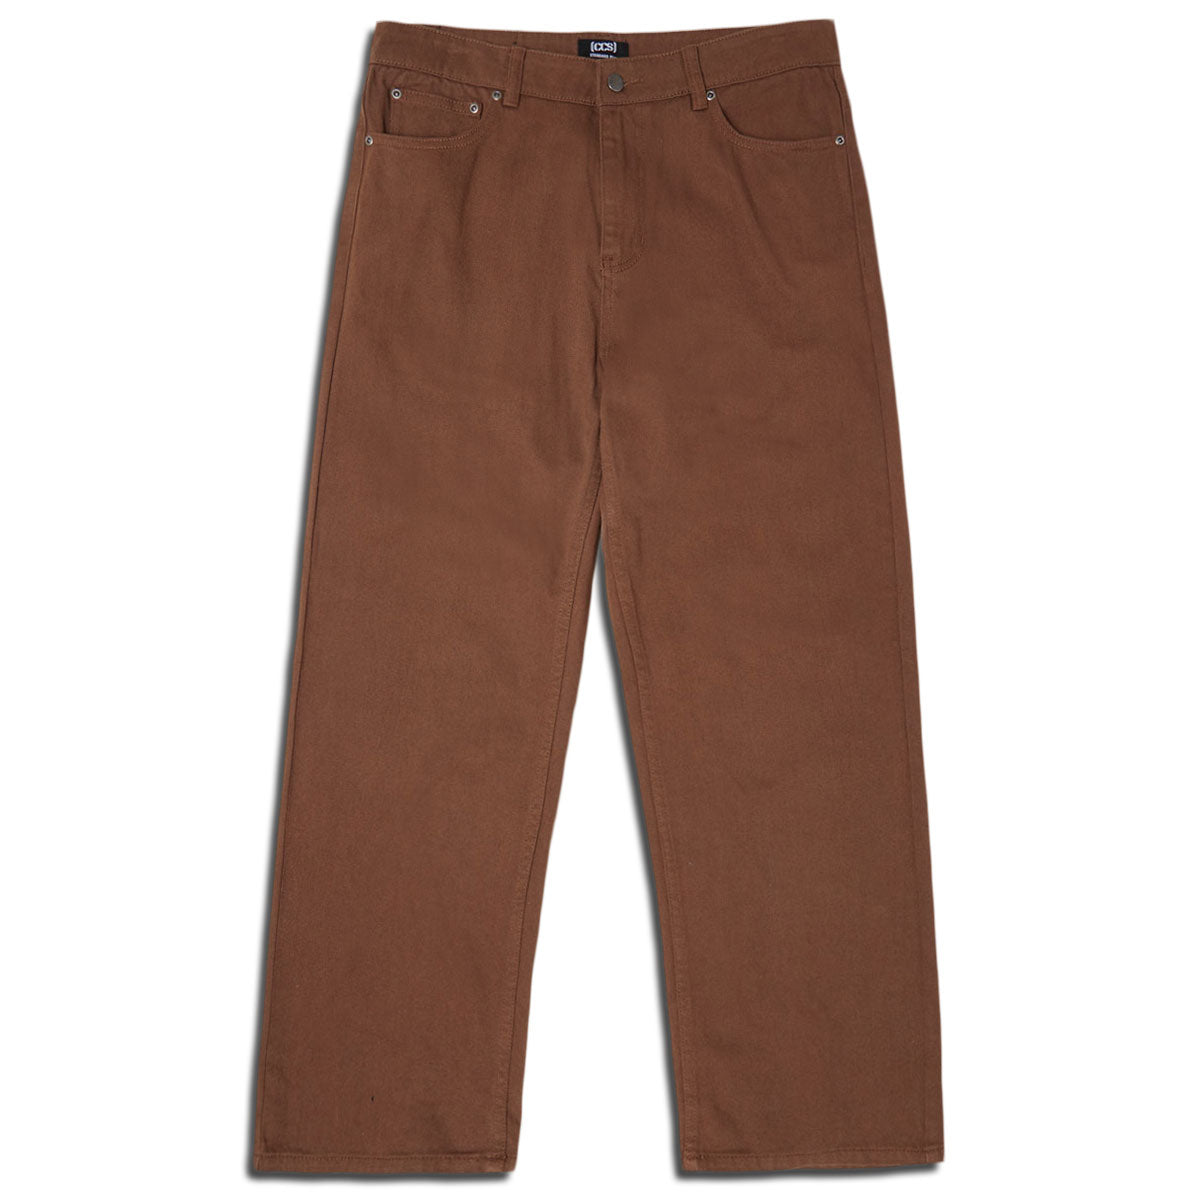 CCS Original Relaxed Denim Jeans - Overdyed Brown image 5